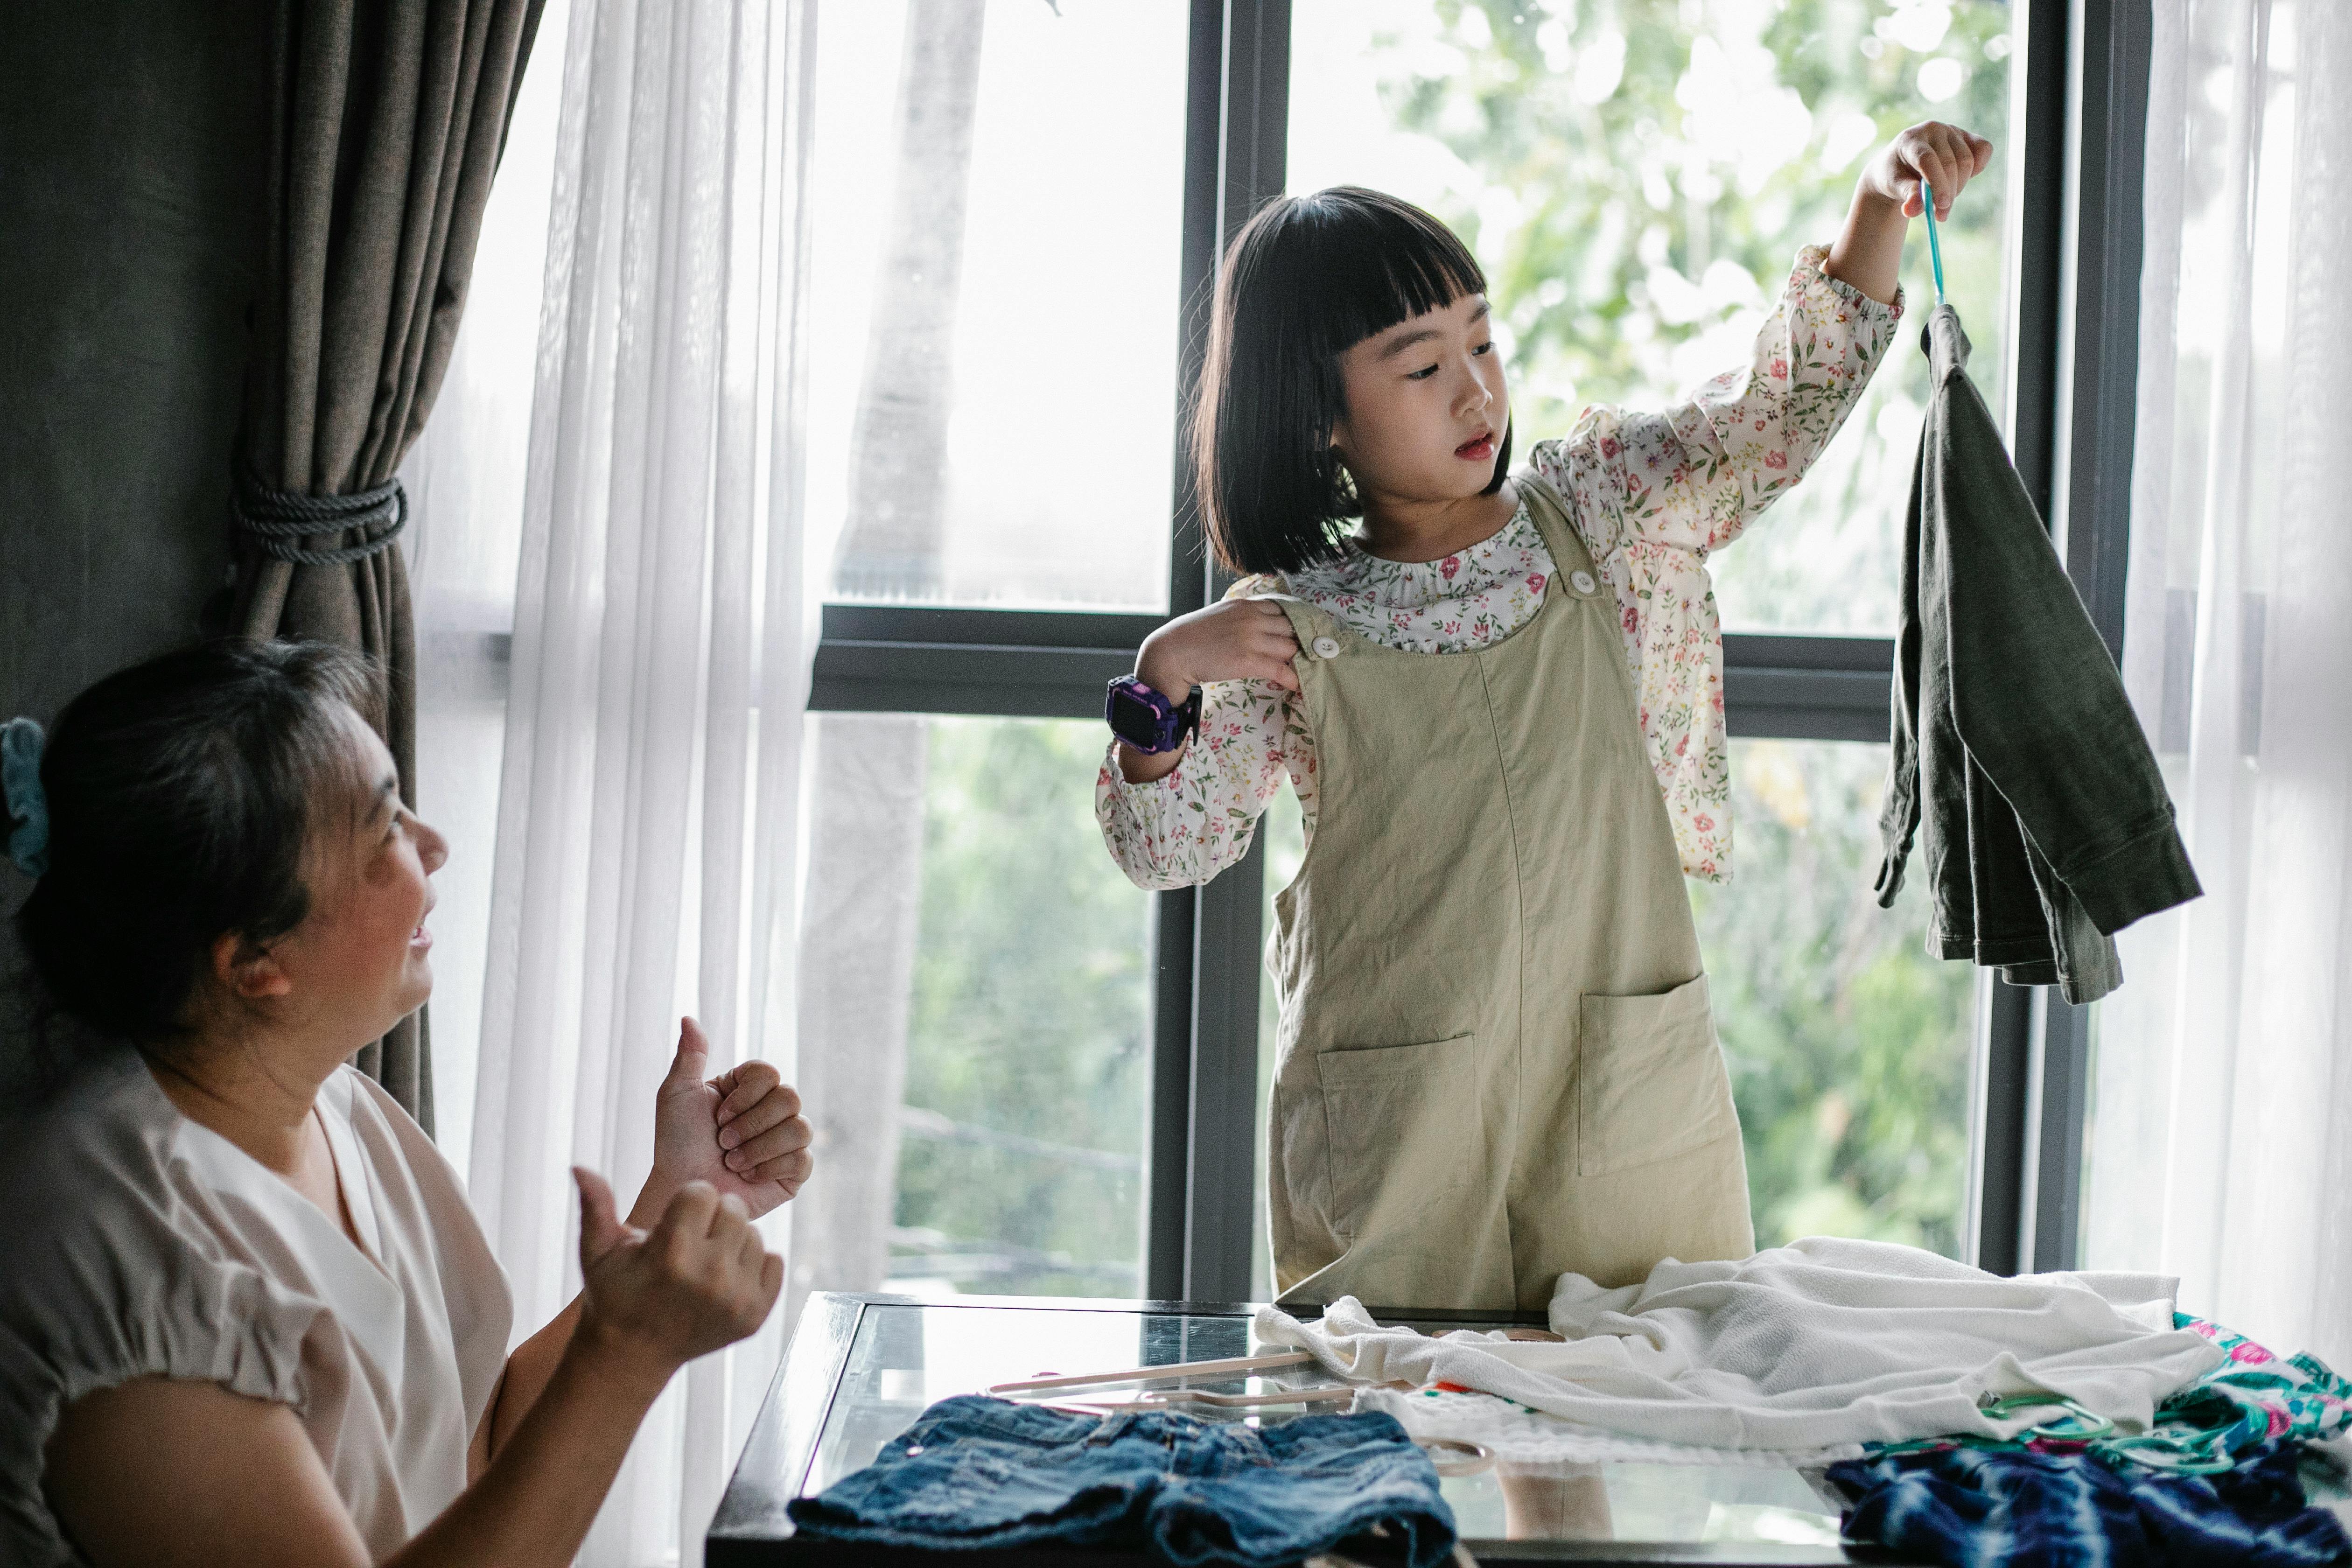 A little girl's mother proud of her for being able to hang up her own clothes | Source: Pexels